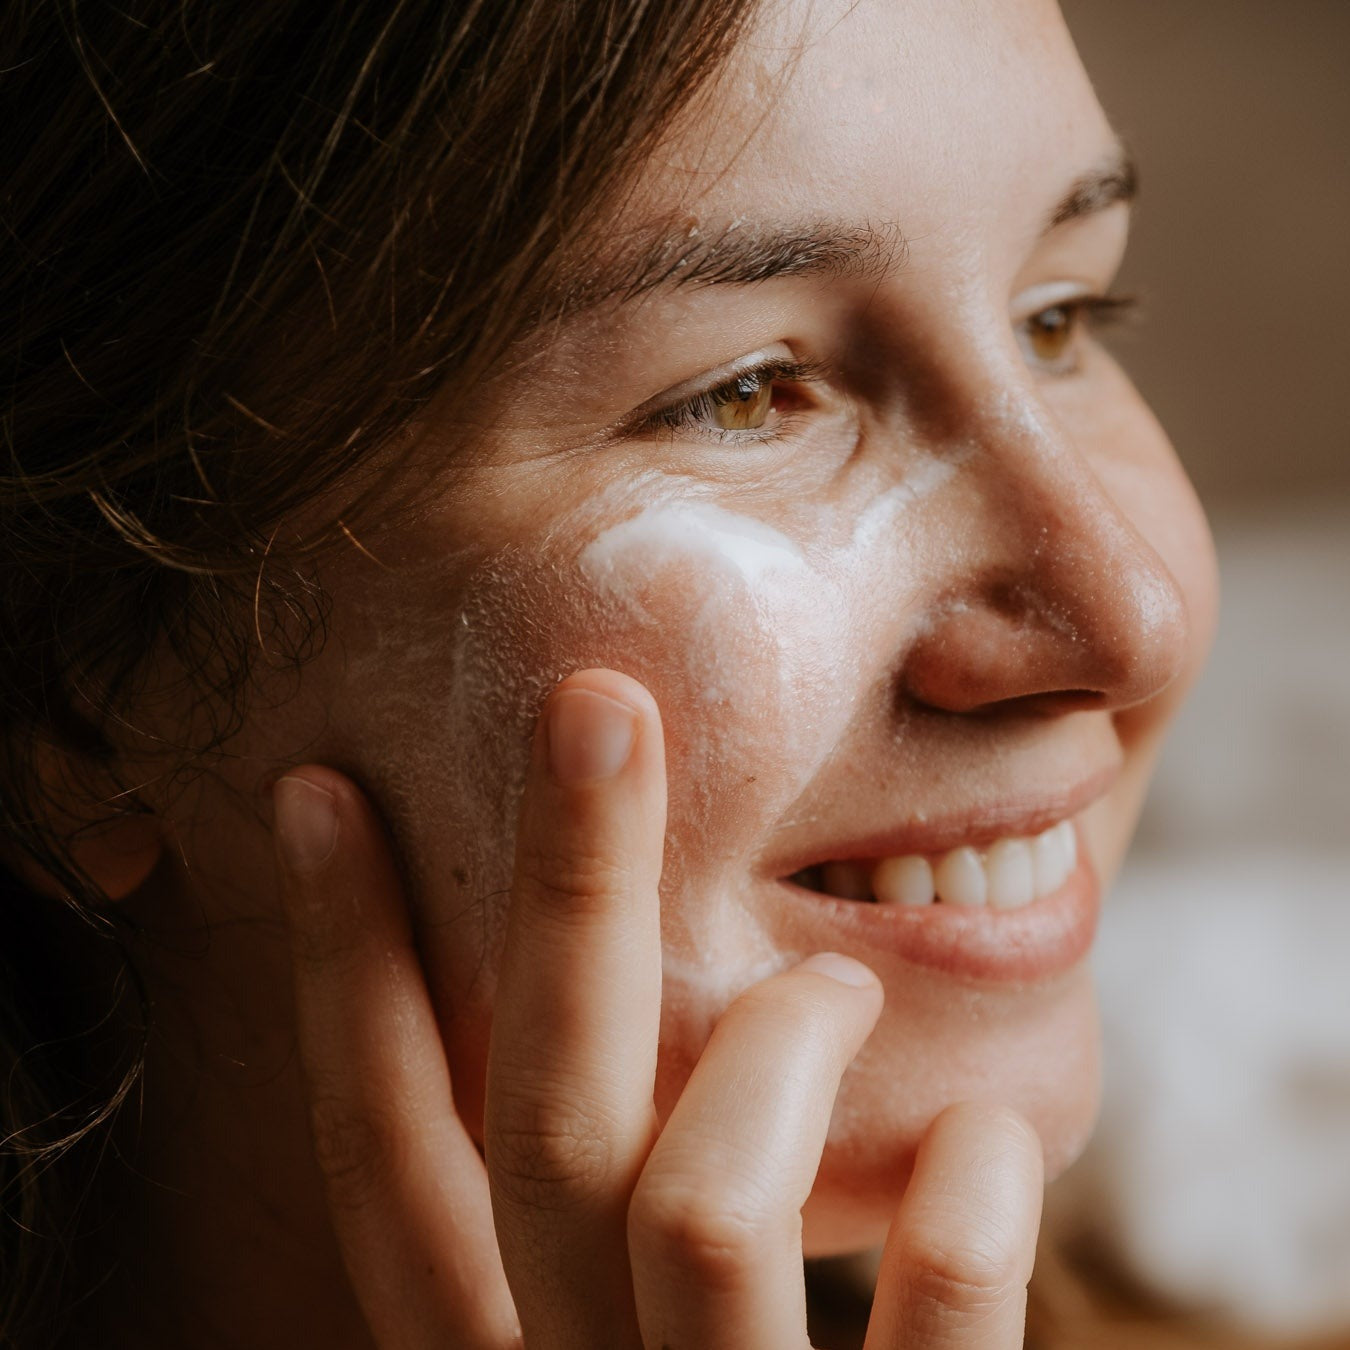 Canvas cream cleanser in models face